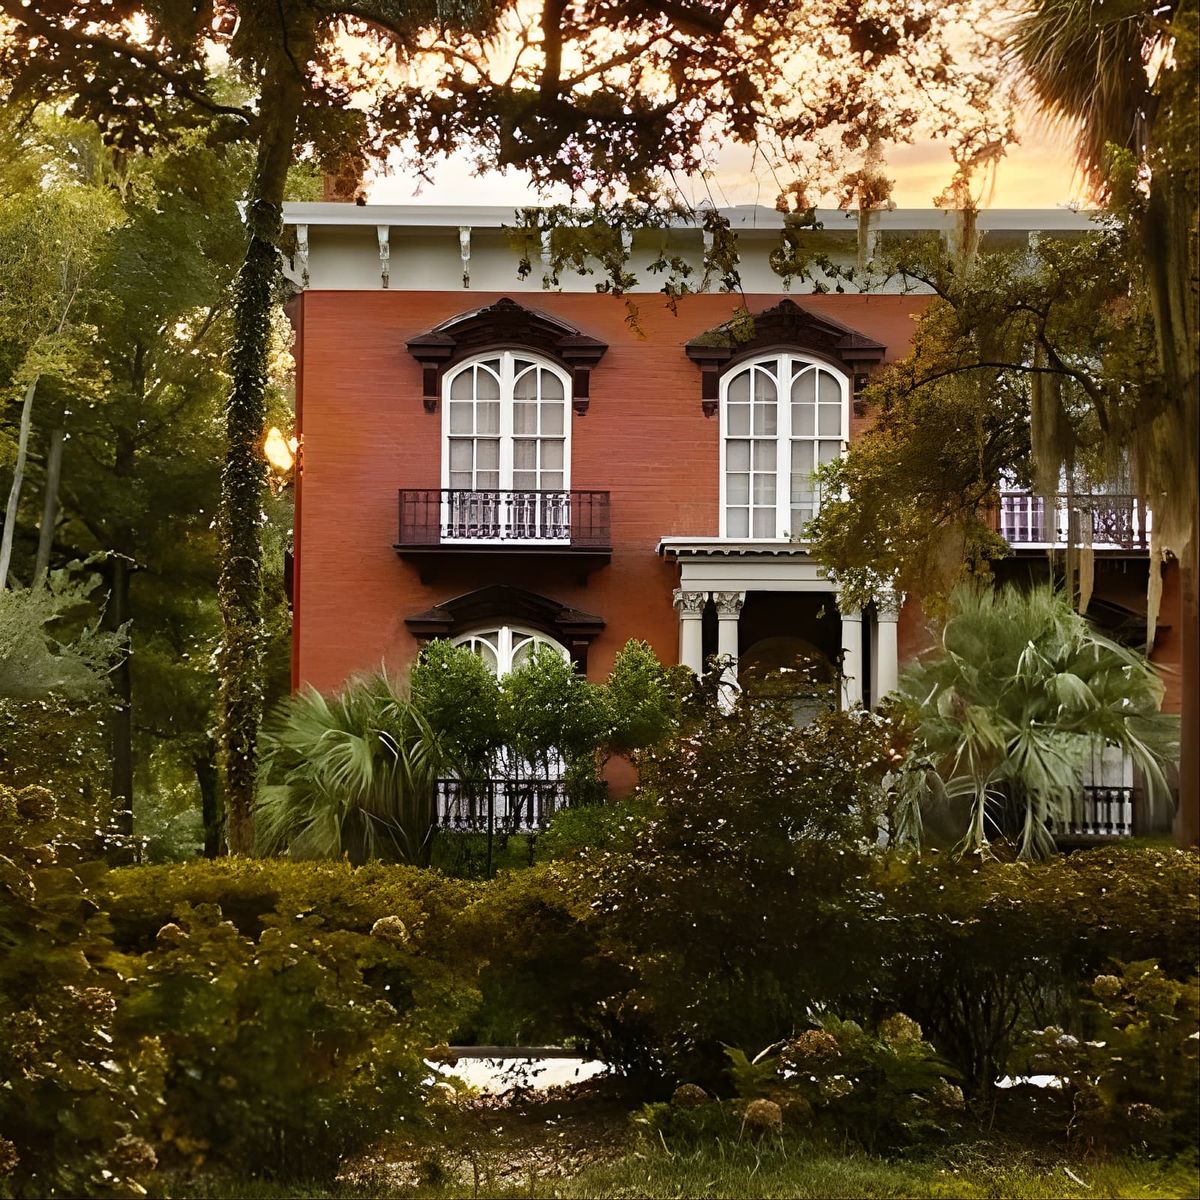 Savannah Historic District Tour by The Wandering Historians